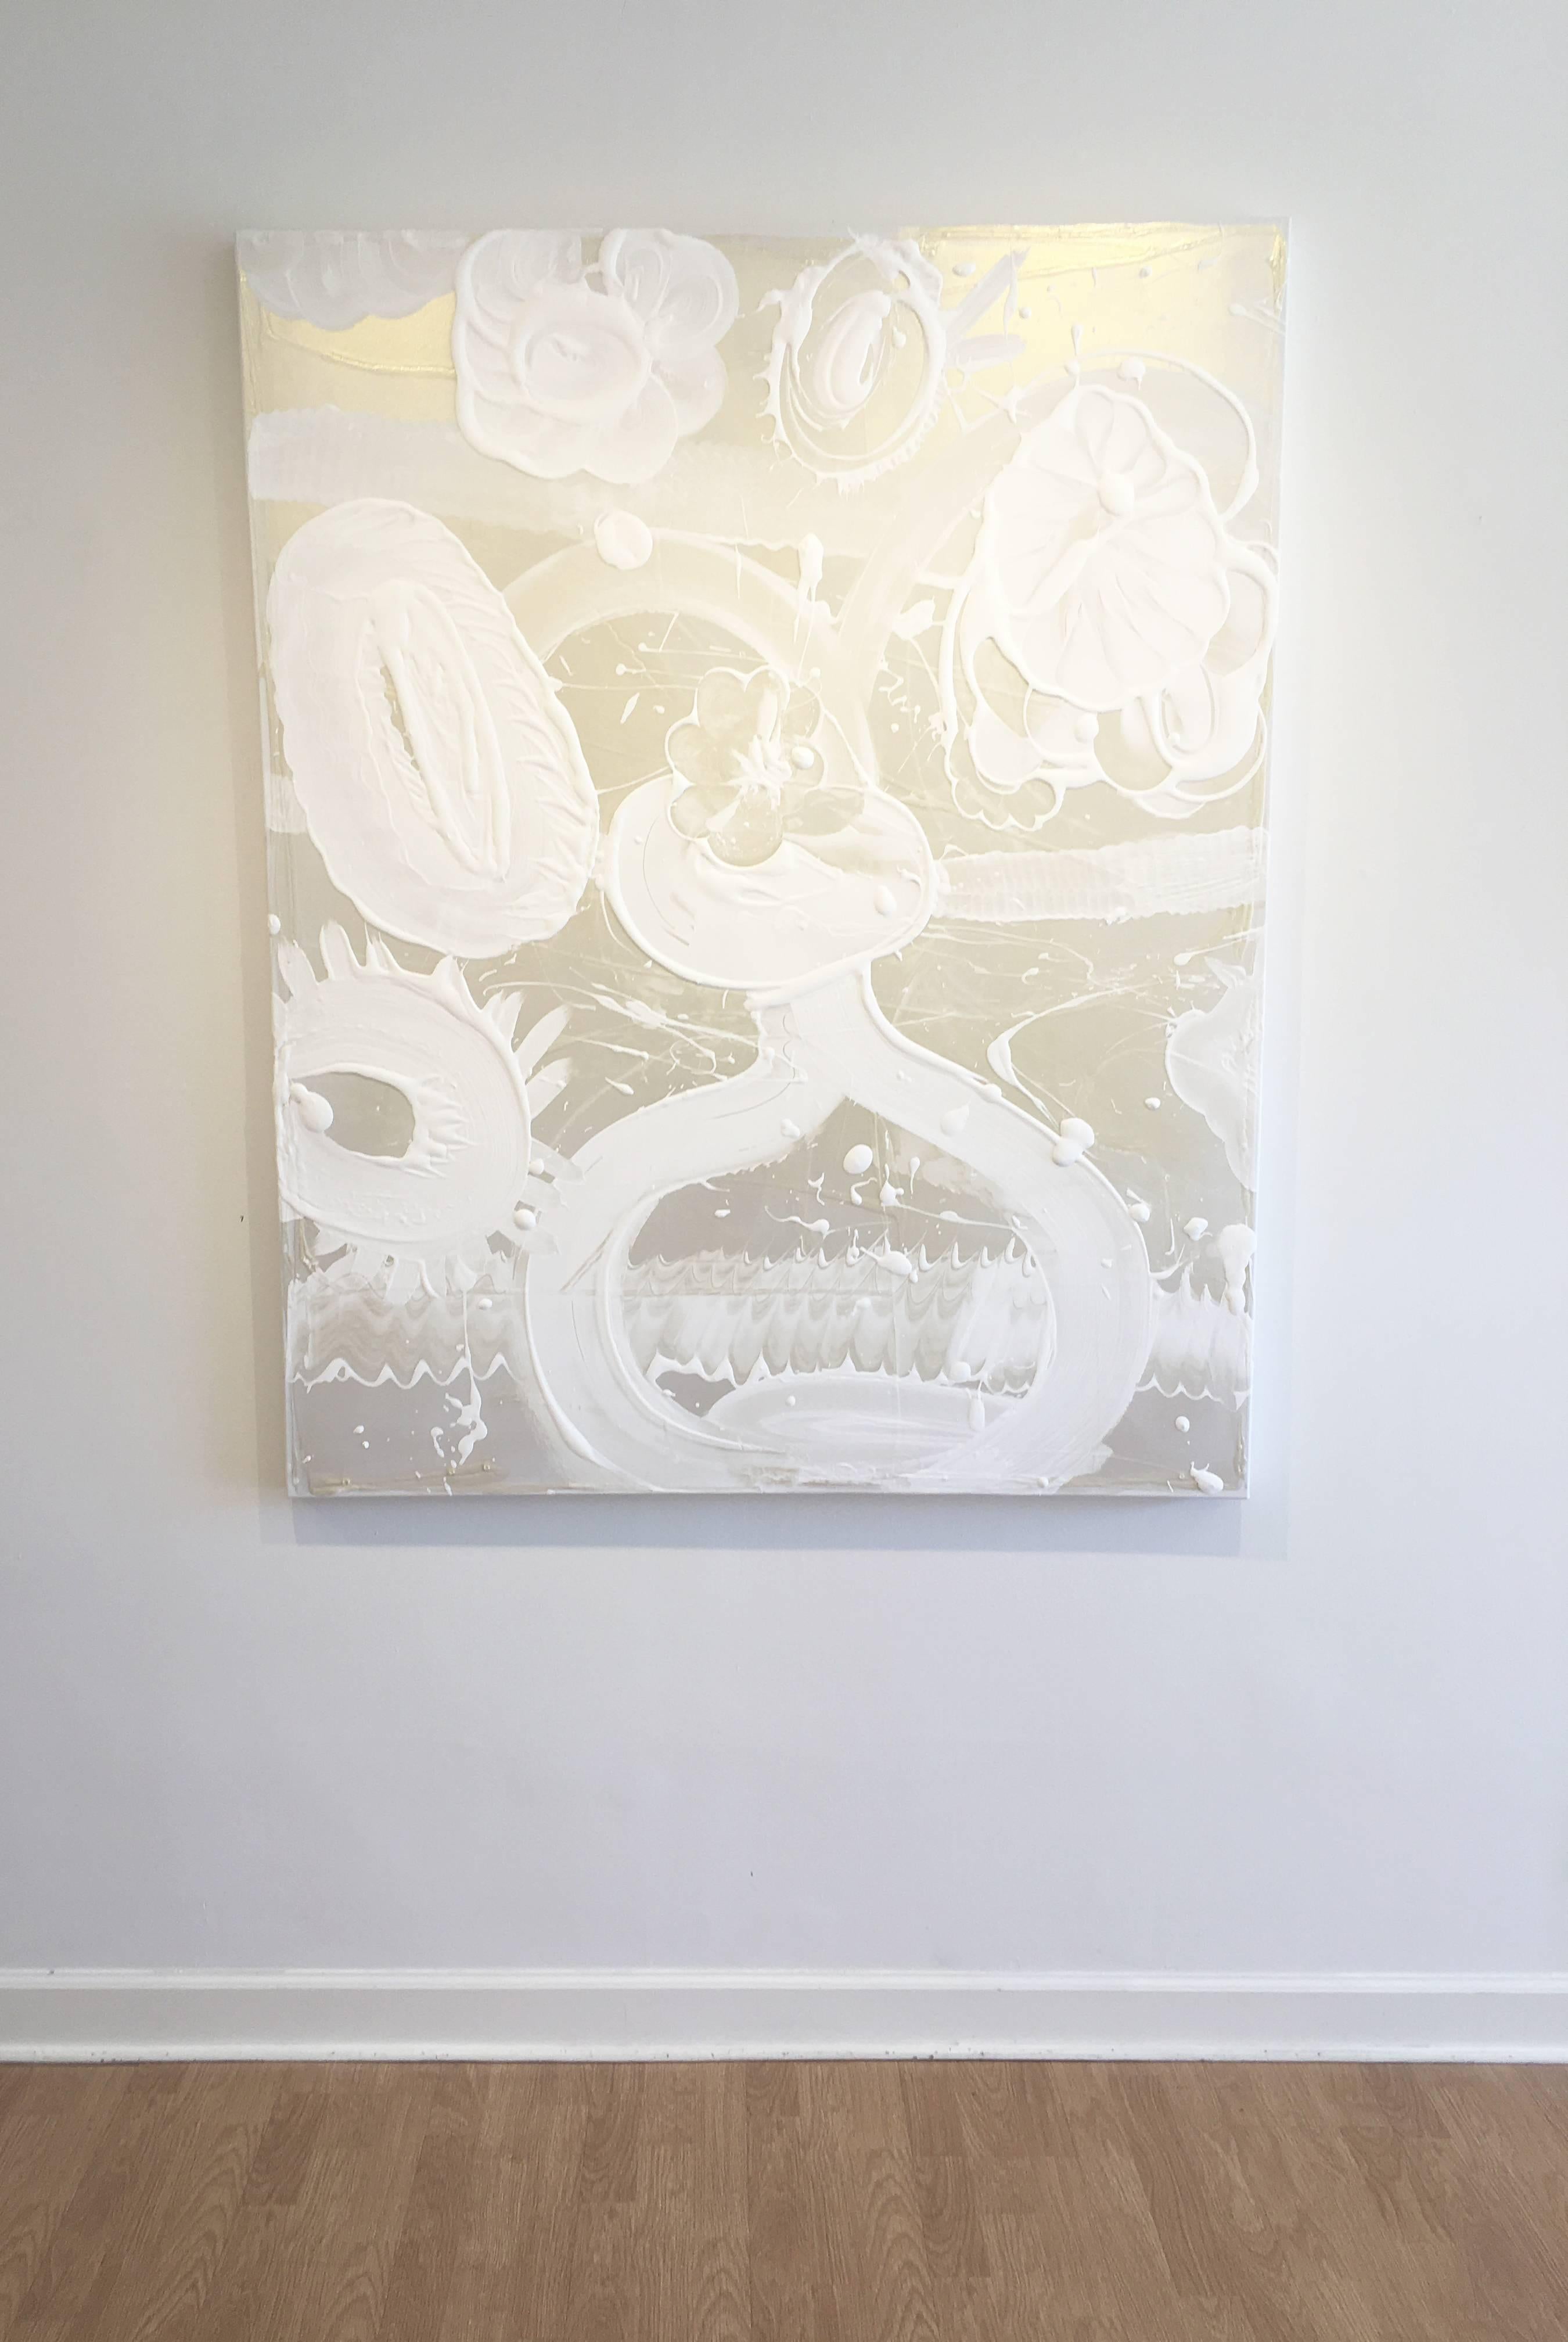 “Zig Zag” by Catherine Howe, 2016. Acrylic and interference mica pigment and resin on canvas, 60 x 48 inches. Howe's abstracted still life florals are painted with a matte white gesso mixture that is applied with thick, sweeping, gestural